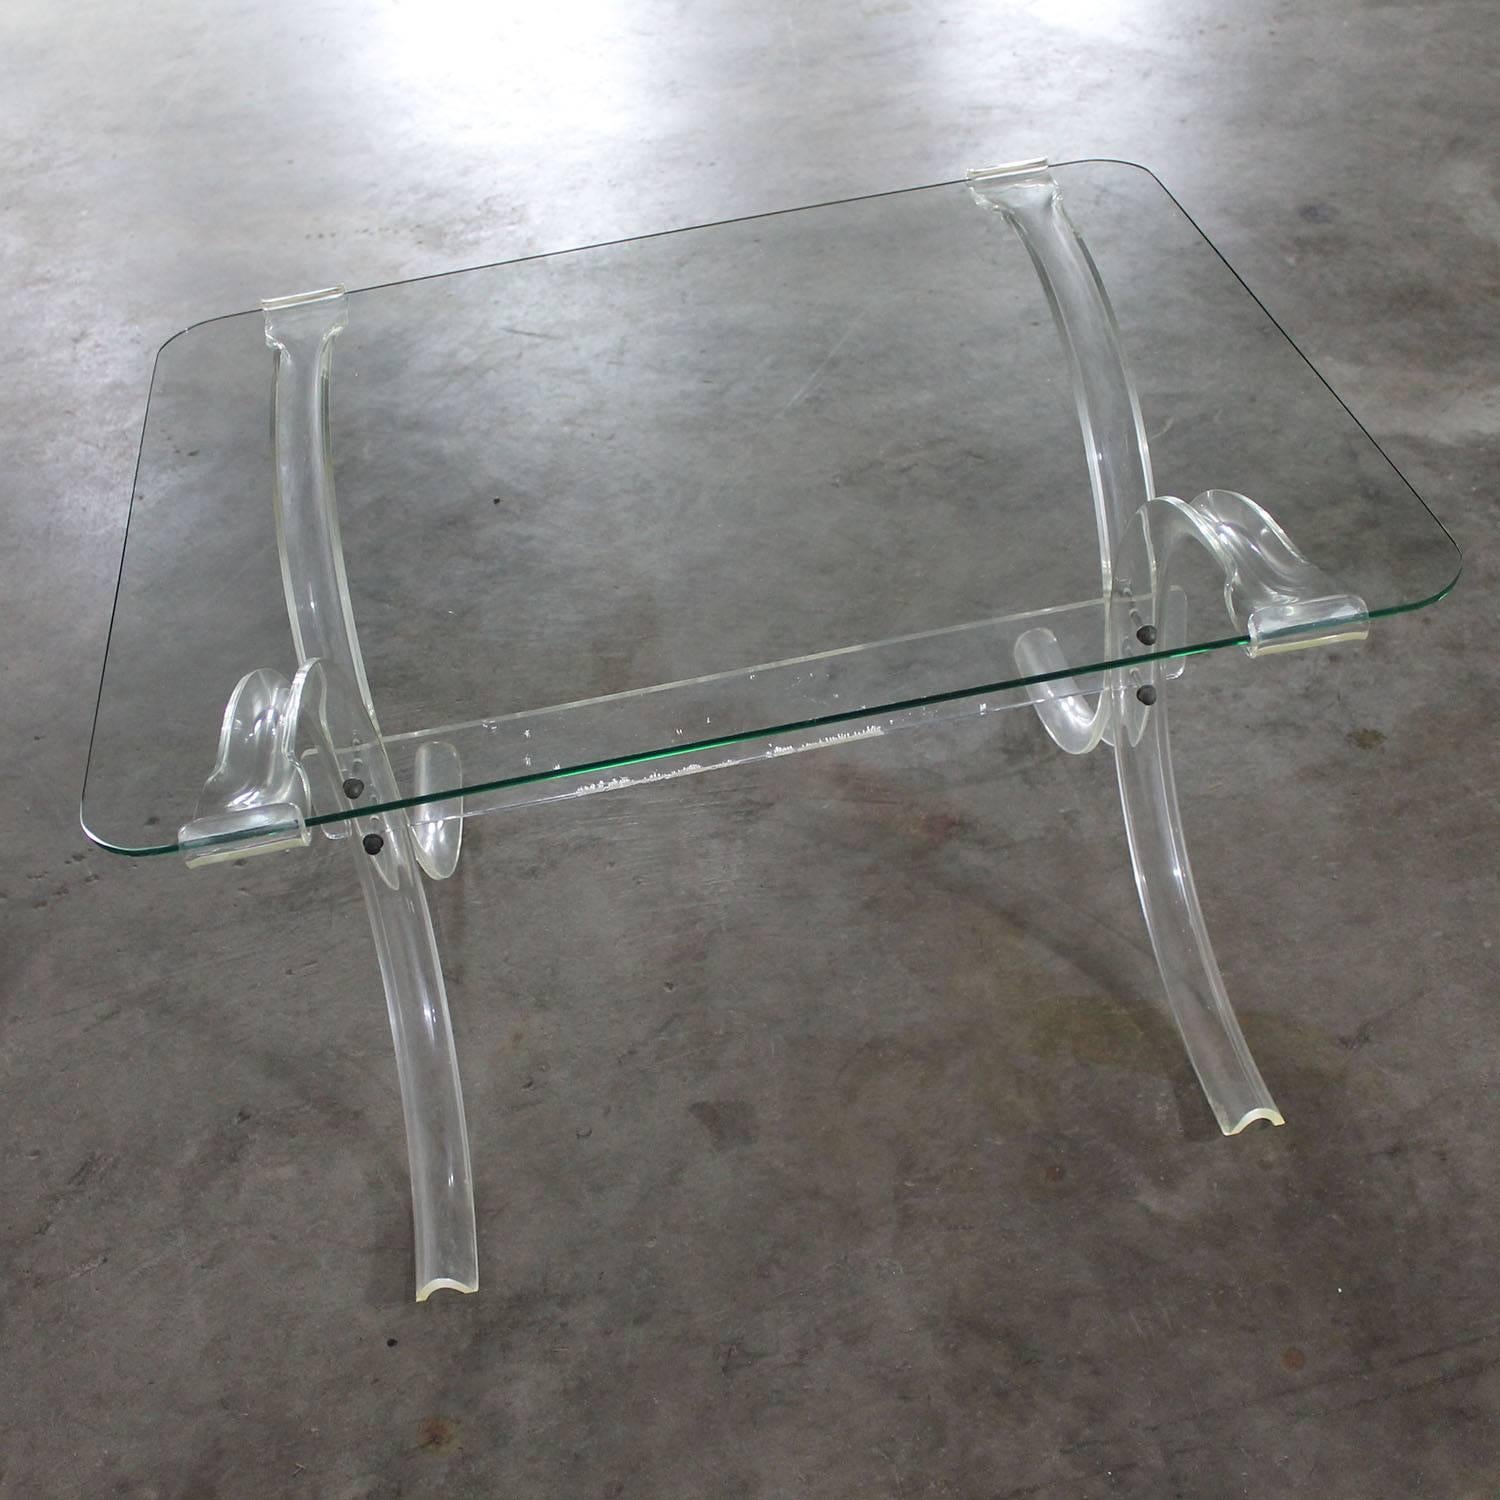 Beautiful Art Deco Hollywood Regency Lucite X base side table with a glass top. In wonderful vintage condition circa 1930-1940s.

Ooh La La! Fabulous little side or end table circa 1930s thru 1940s. Comprised of folded and rounded Lucite forming a